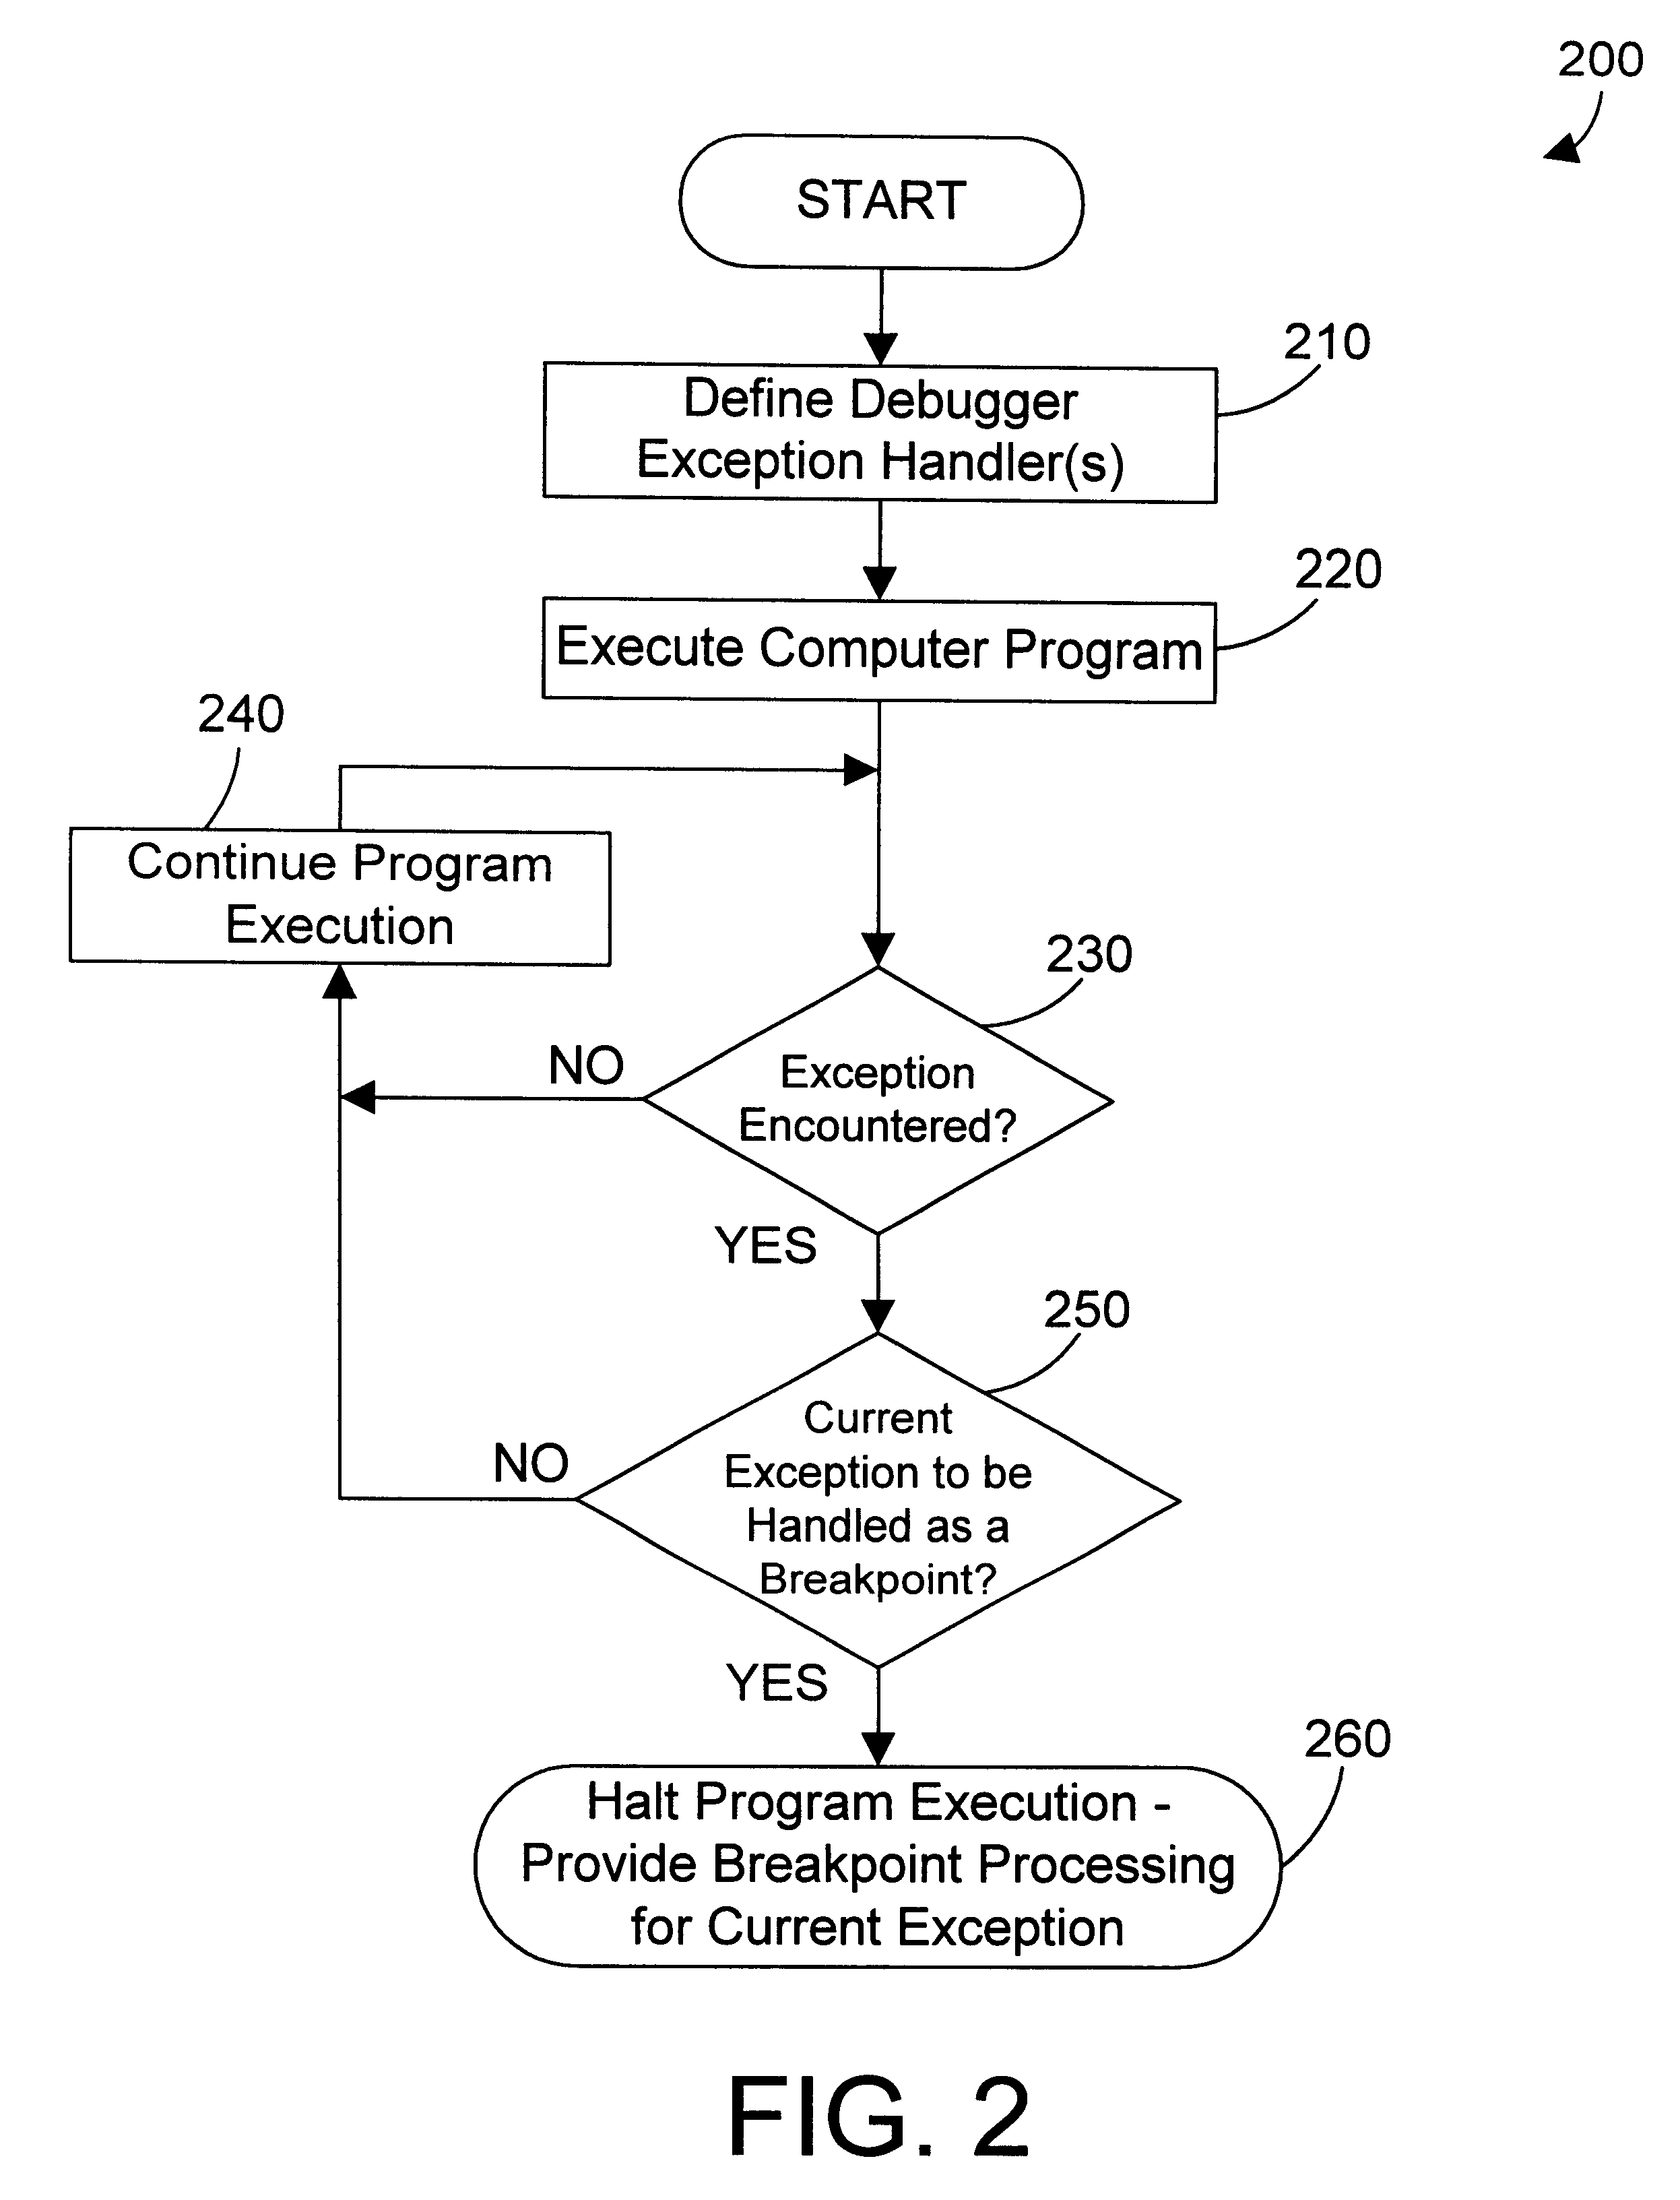 Apparatus and method for dynamically defining exception handlers in a debugger